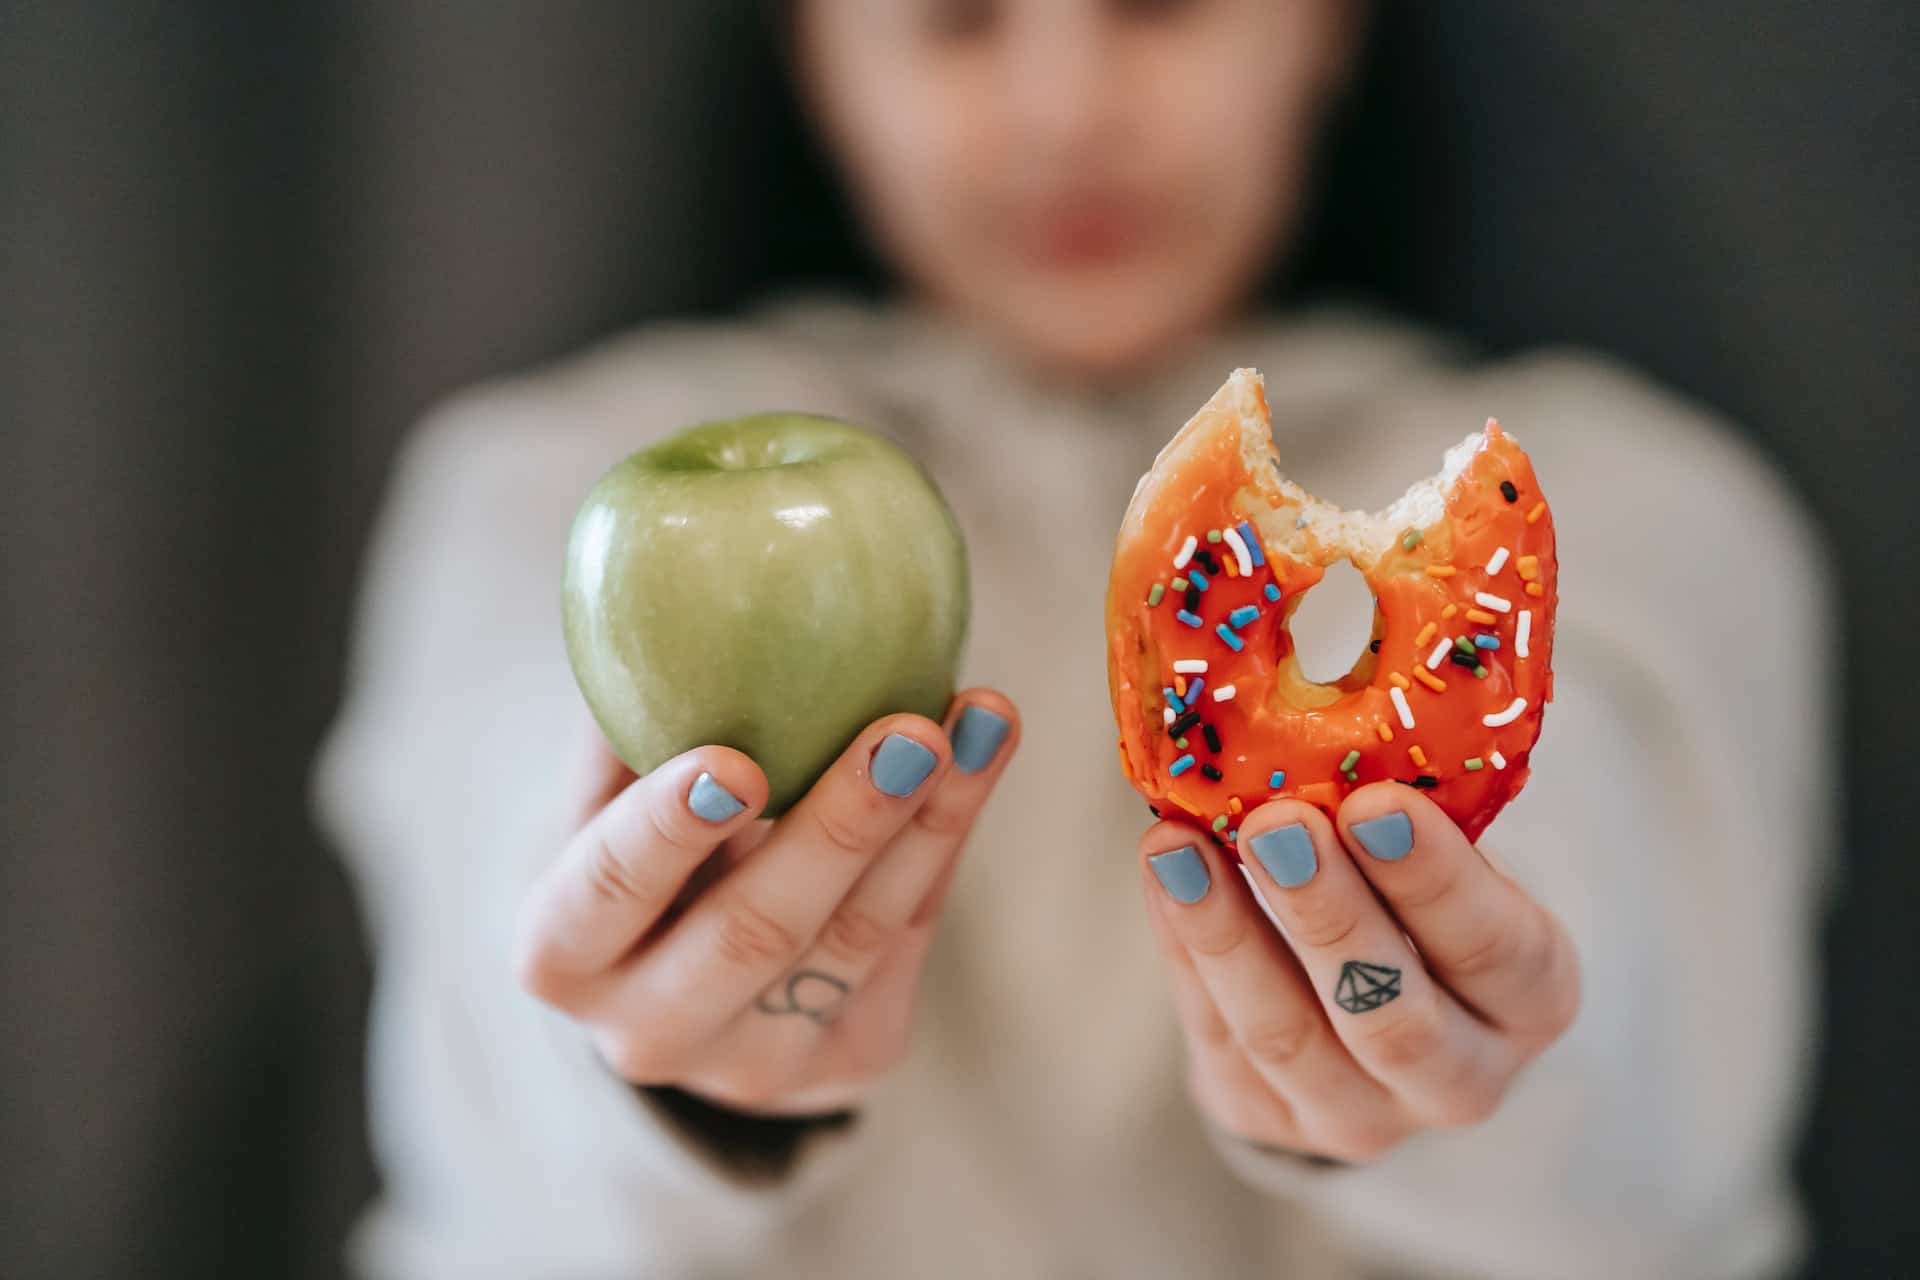 Out-of-focus woman holding an apple and donut